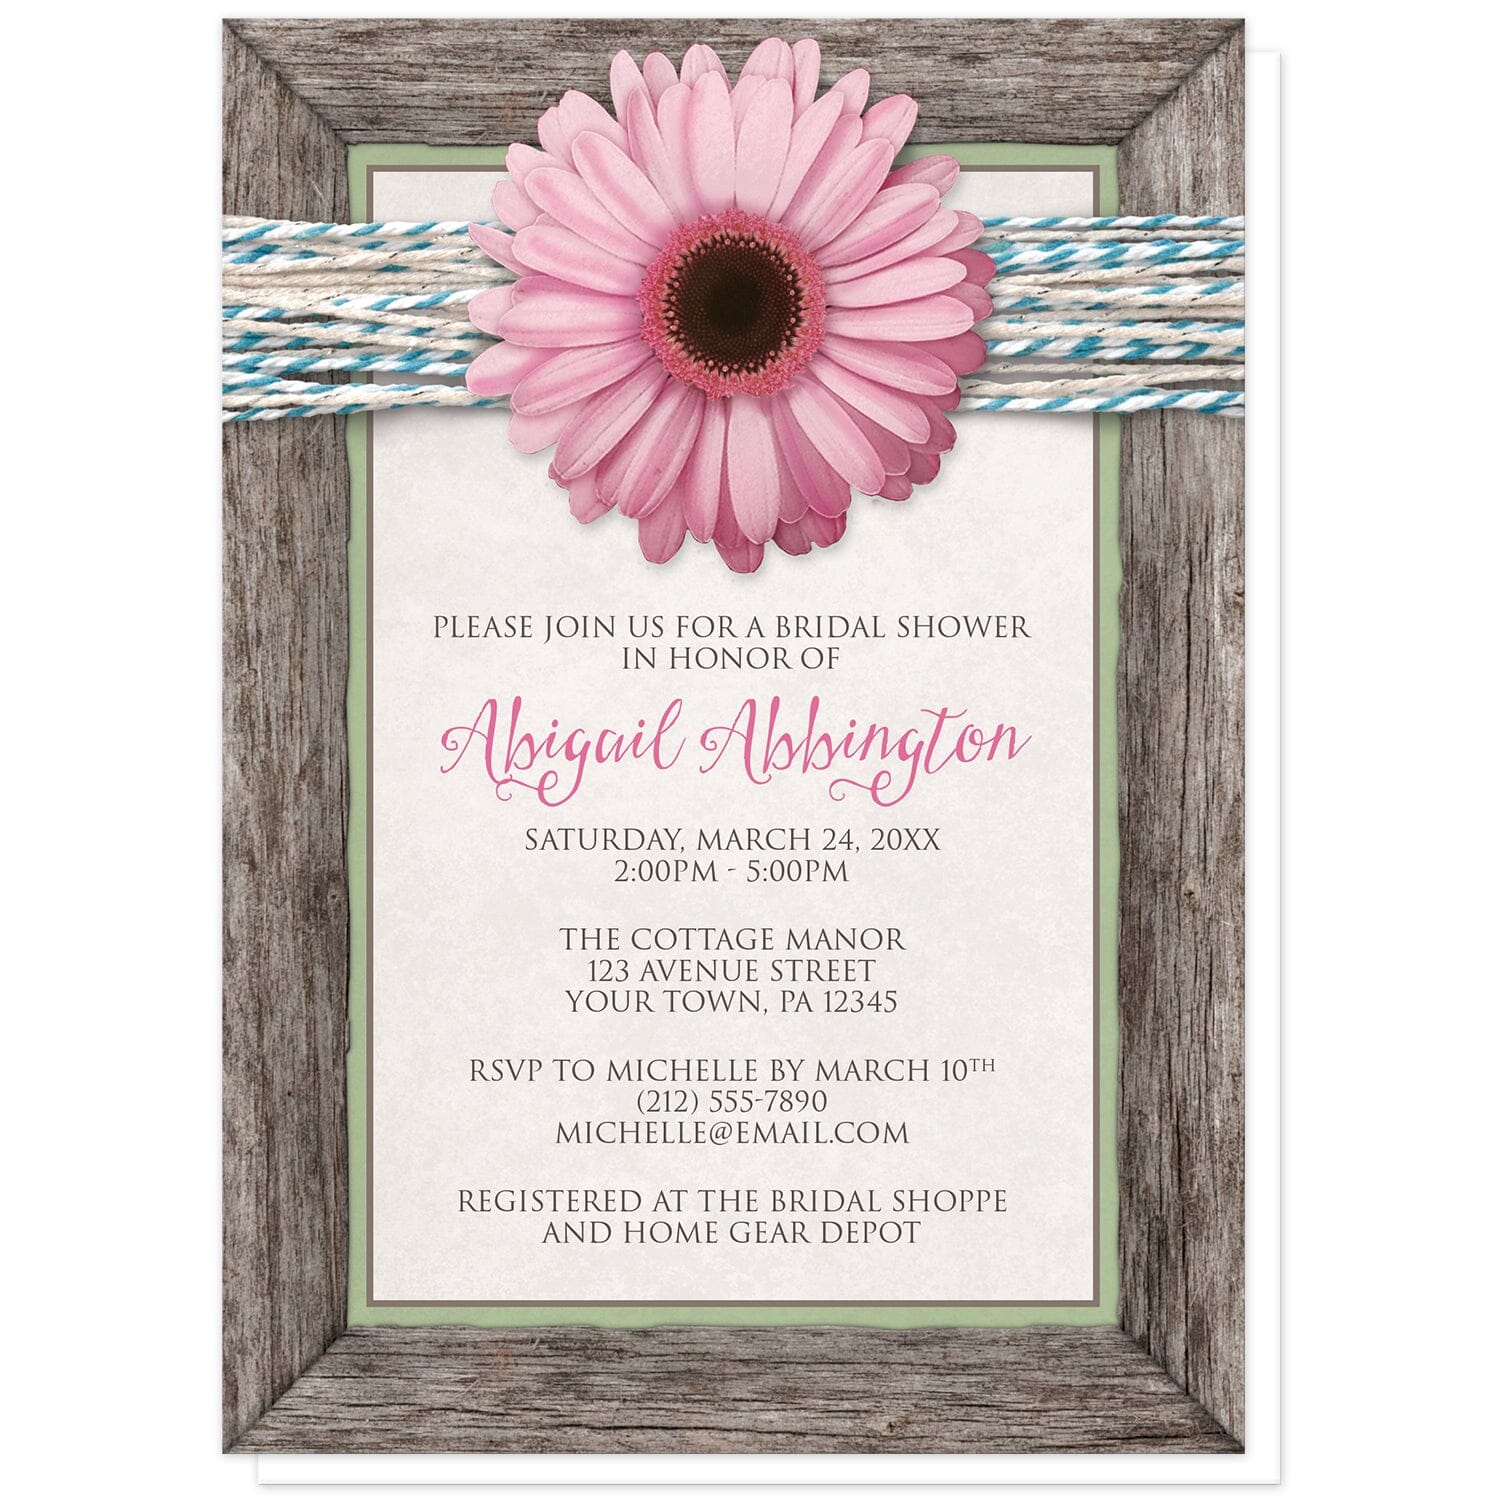 Rustic Chic Pink Daisy Turquoise Wood Bridal Shower Invitations at Artistically Invited. Southern-inspired rustic chic pink daisy turquoise wood bridal shower invitations with an illustration of a pink daisy flower over a turquoise, white, and off-white twine design along the top. Your personalized bridal shower celebration details are custom printed in brown and pink over an off-white background with a rustic wood frame design around it.